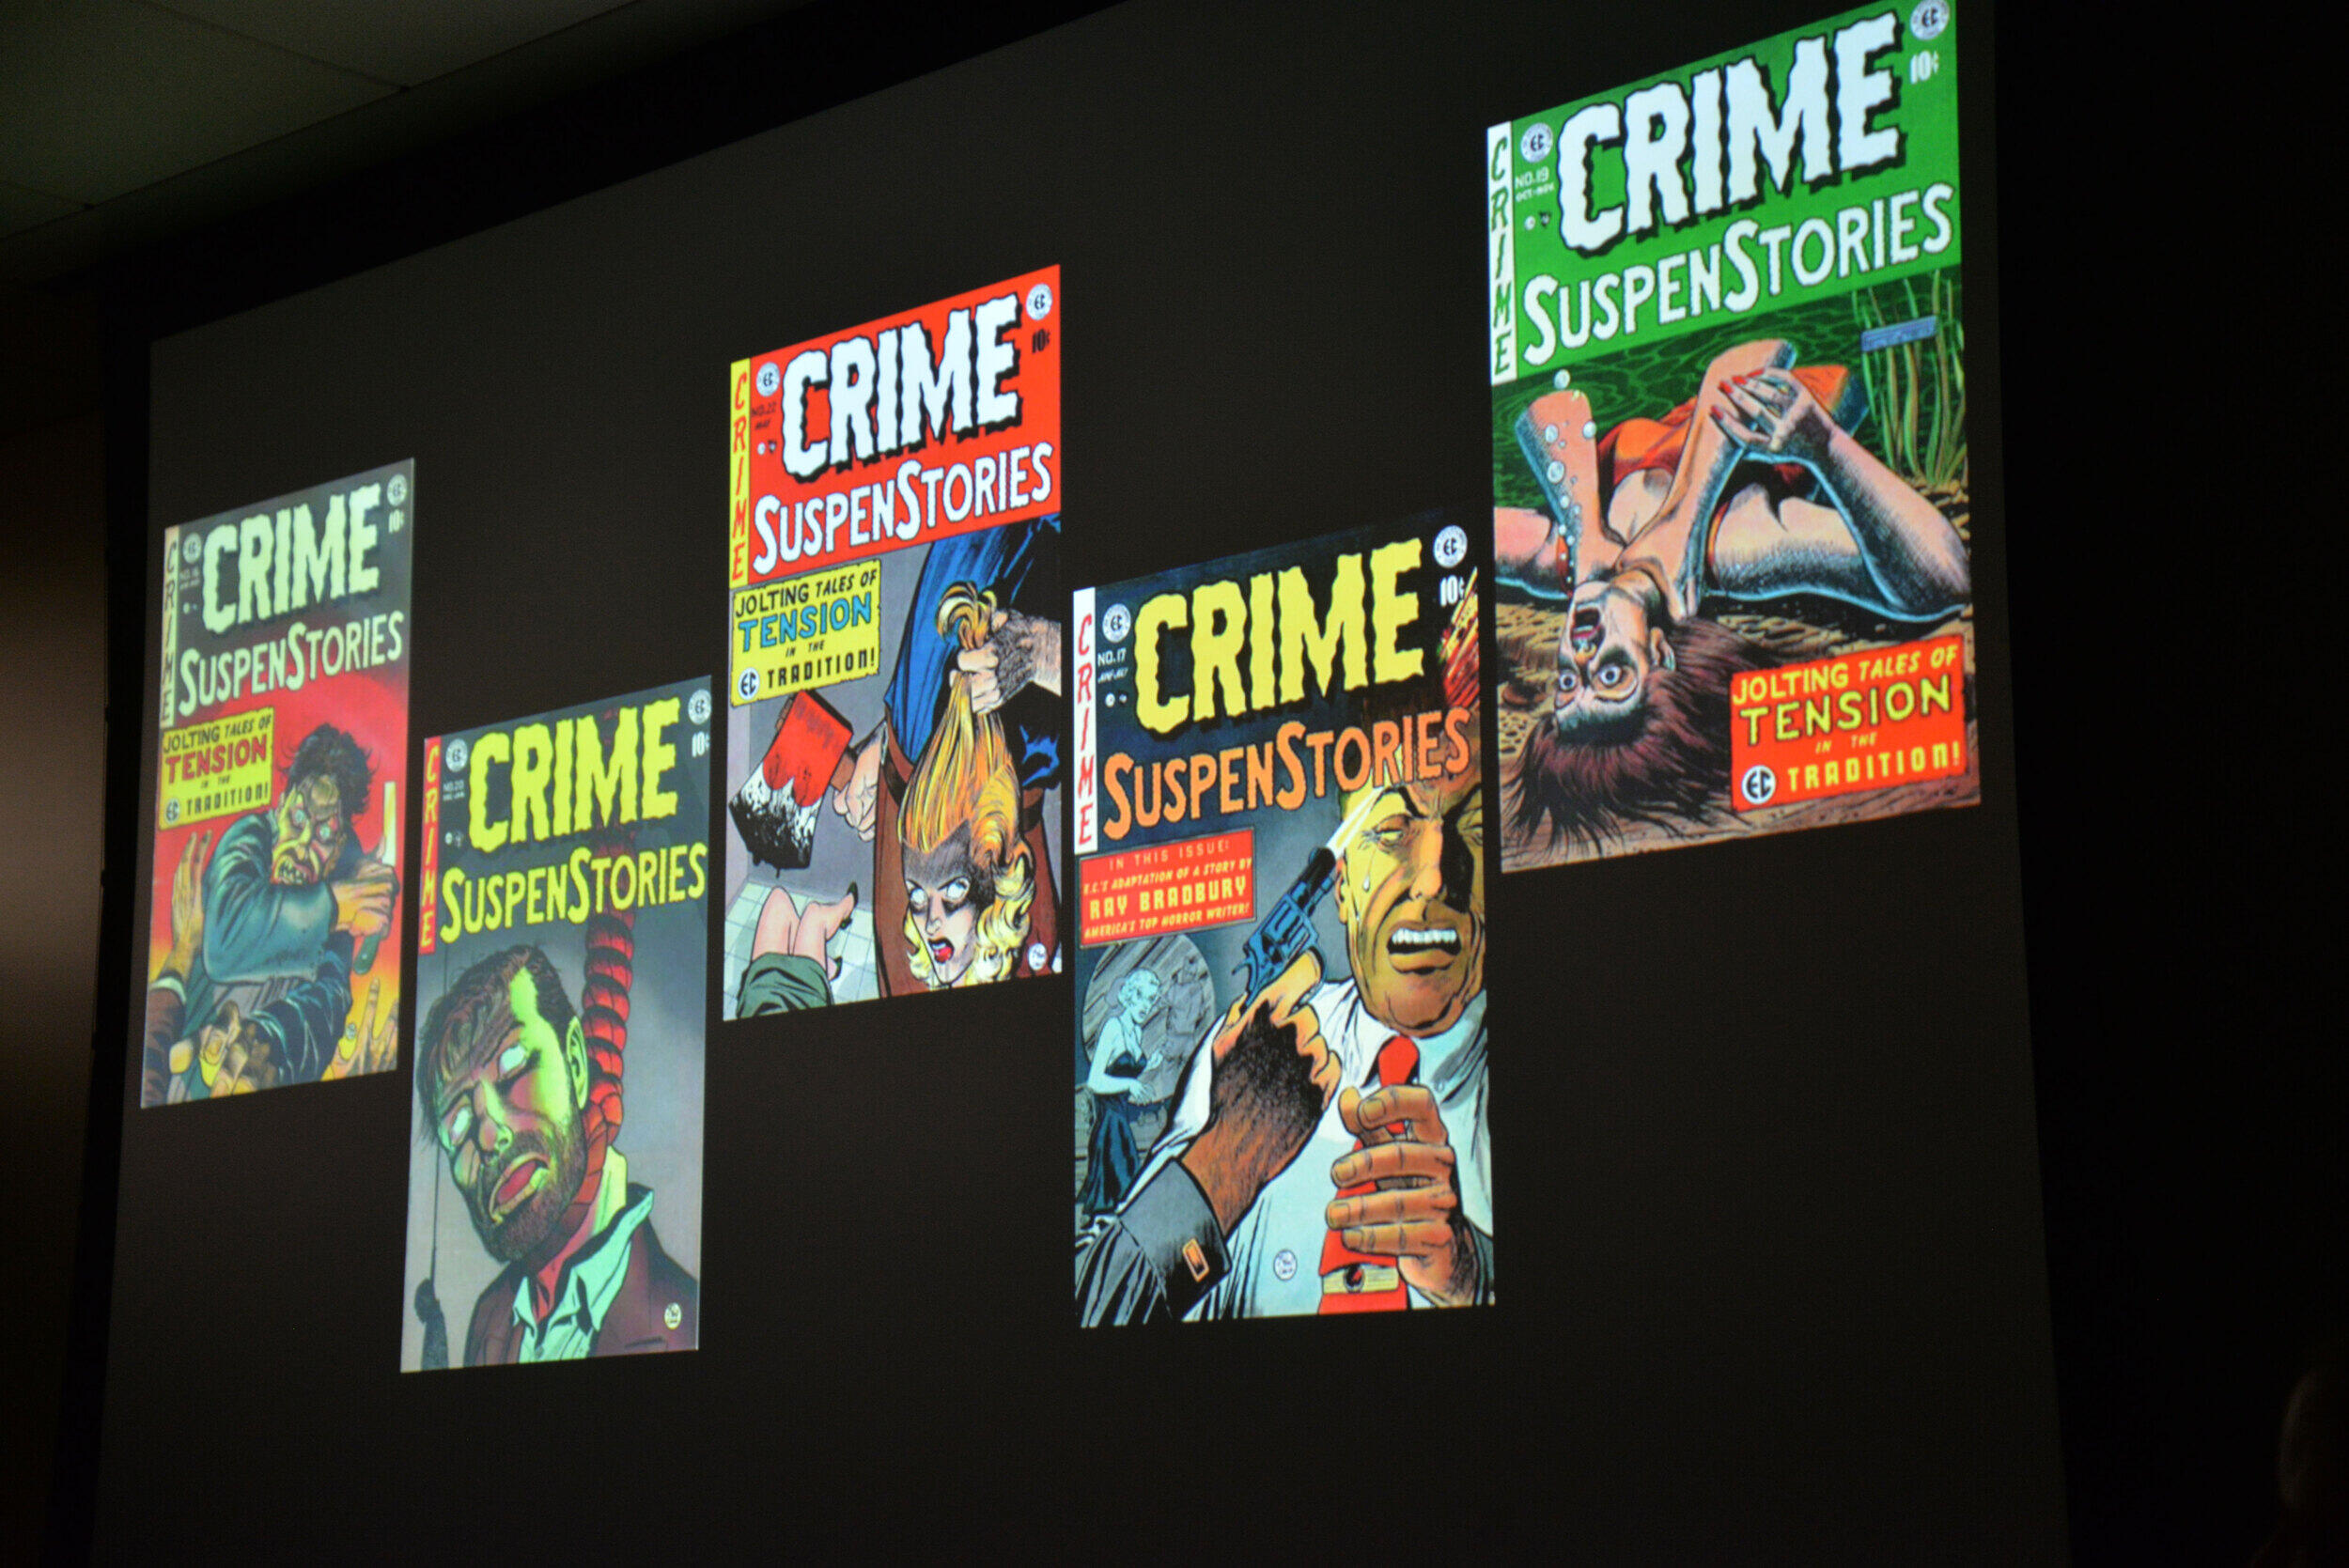 Four covers of editions of Crime SuspenStories are displayed on a screen during a presentation.